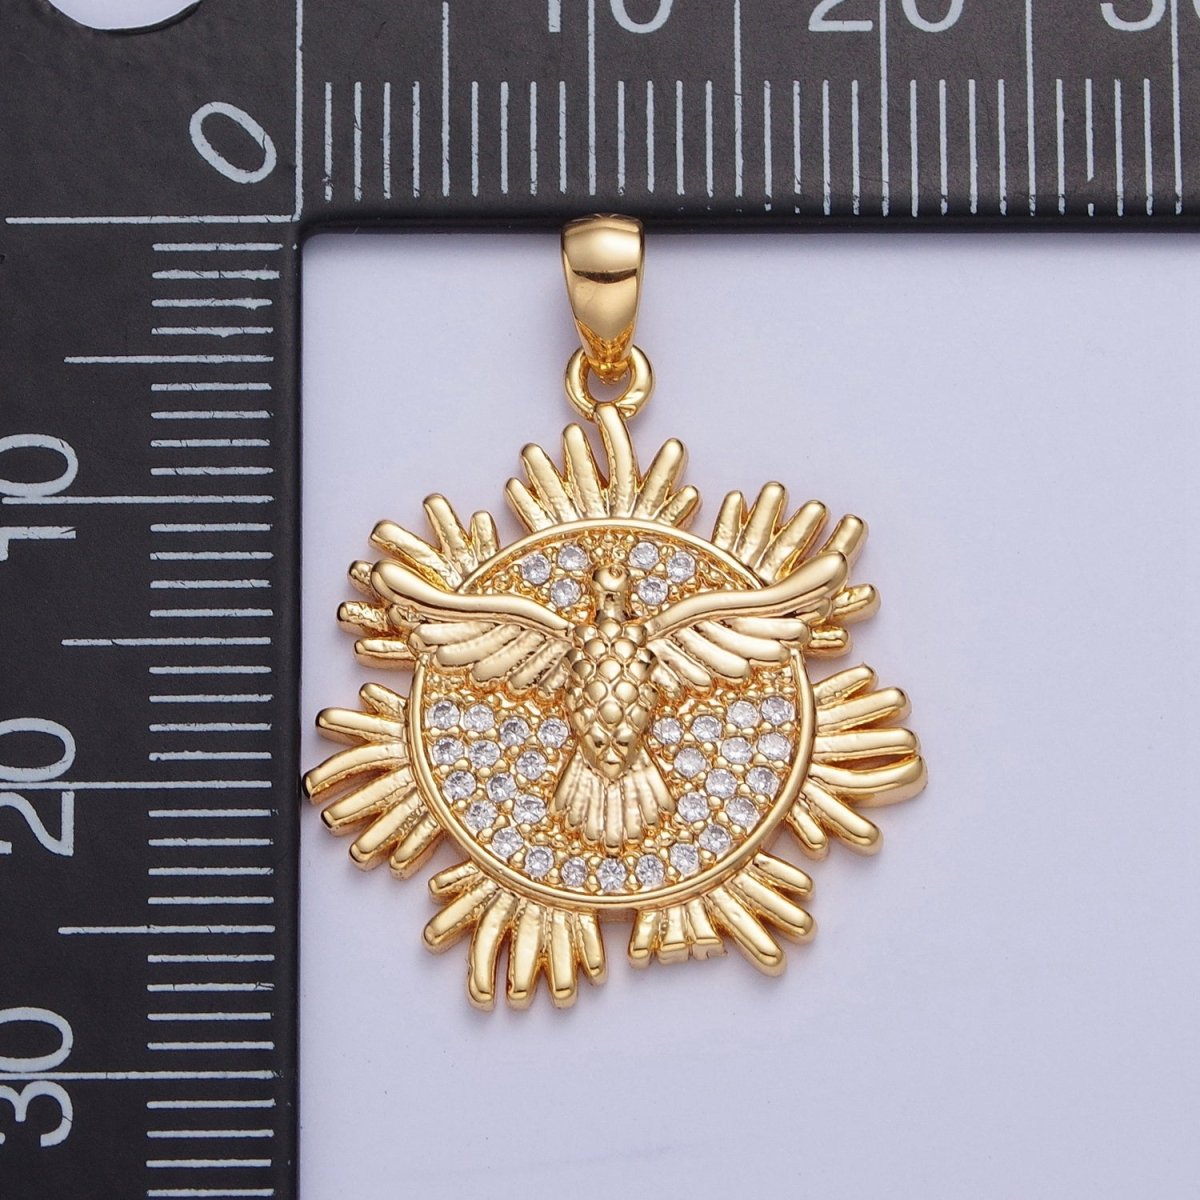 24K Gold Filled Eagle Bird Medallion Micro Pave Pendant For Jewelry Making X-446 - DLUXCA